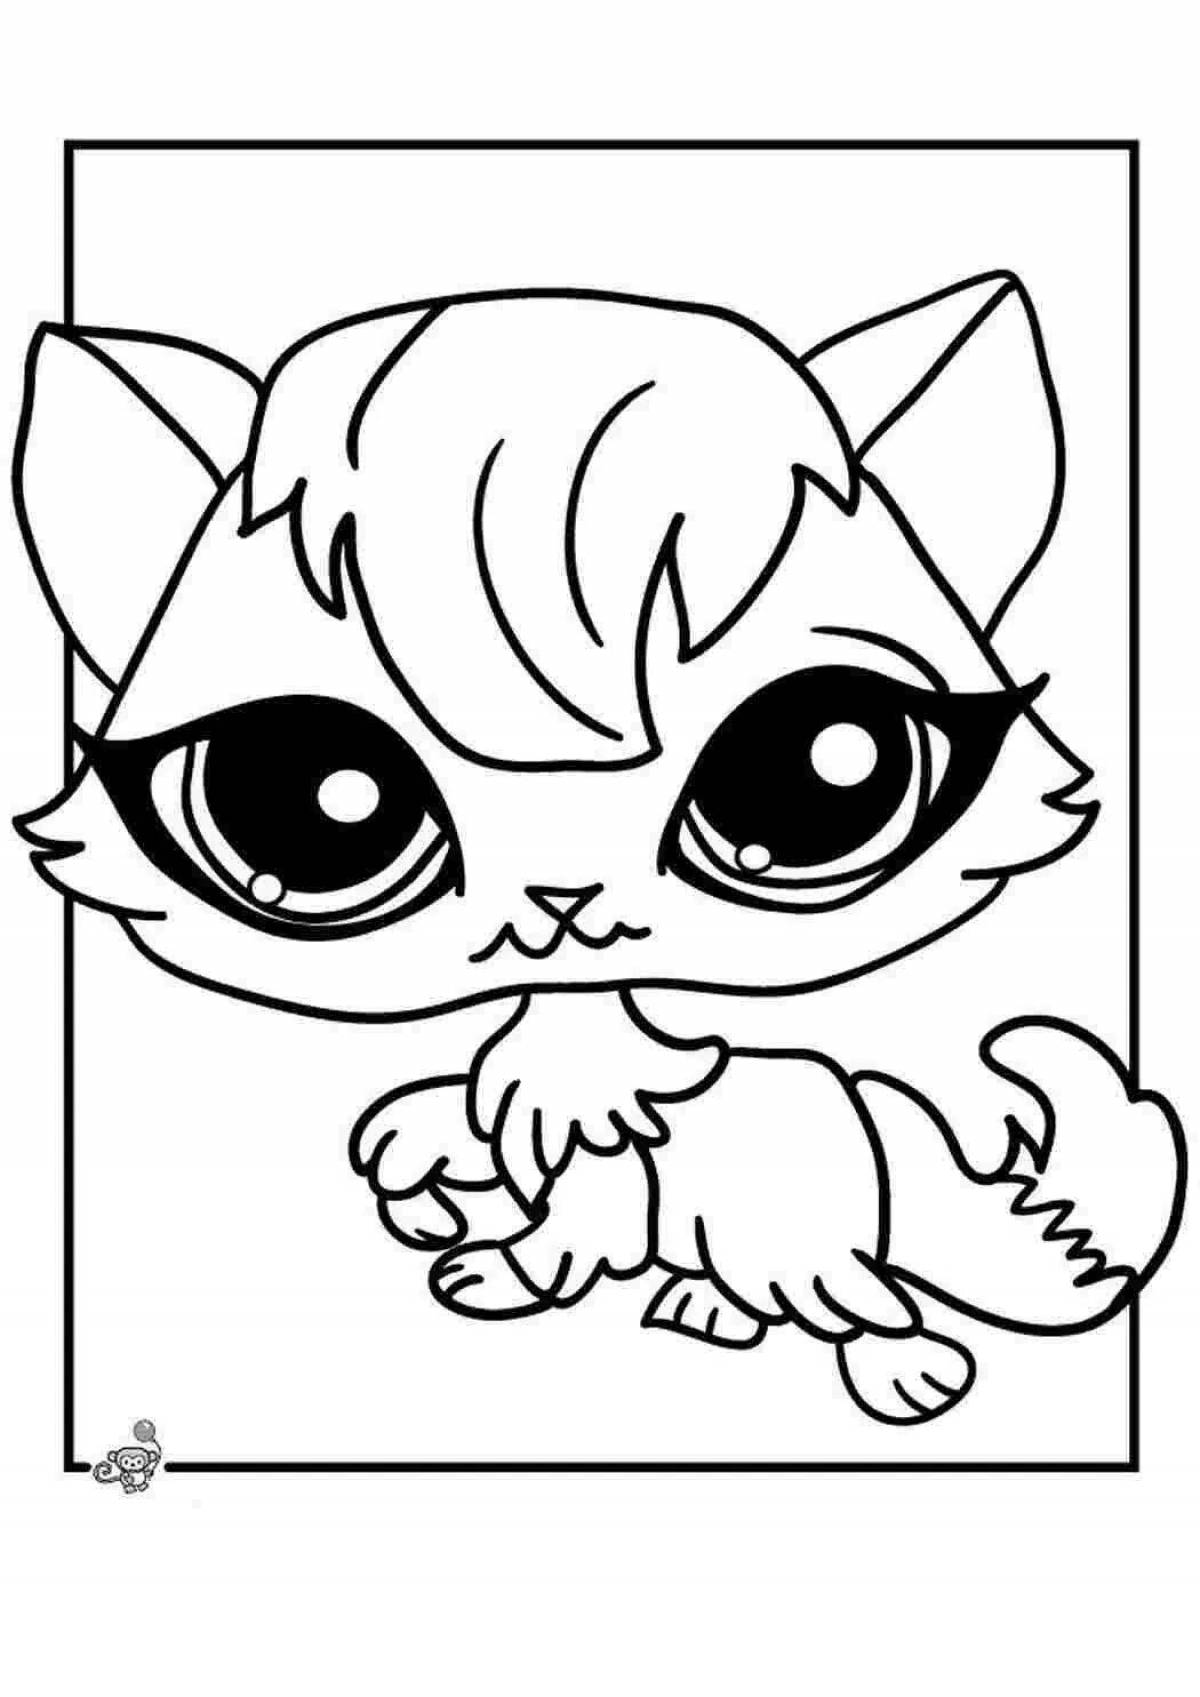 Cute cute kitten coloring page